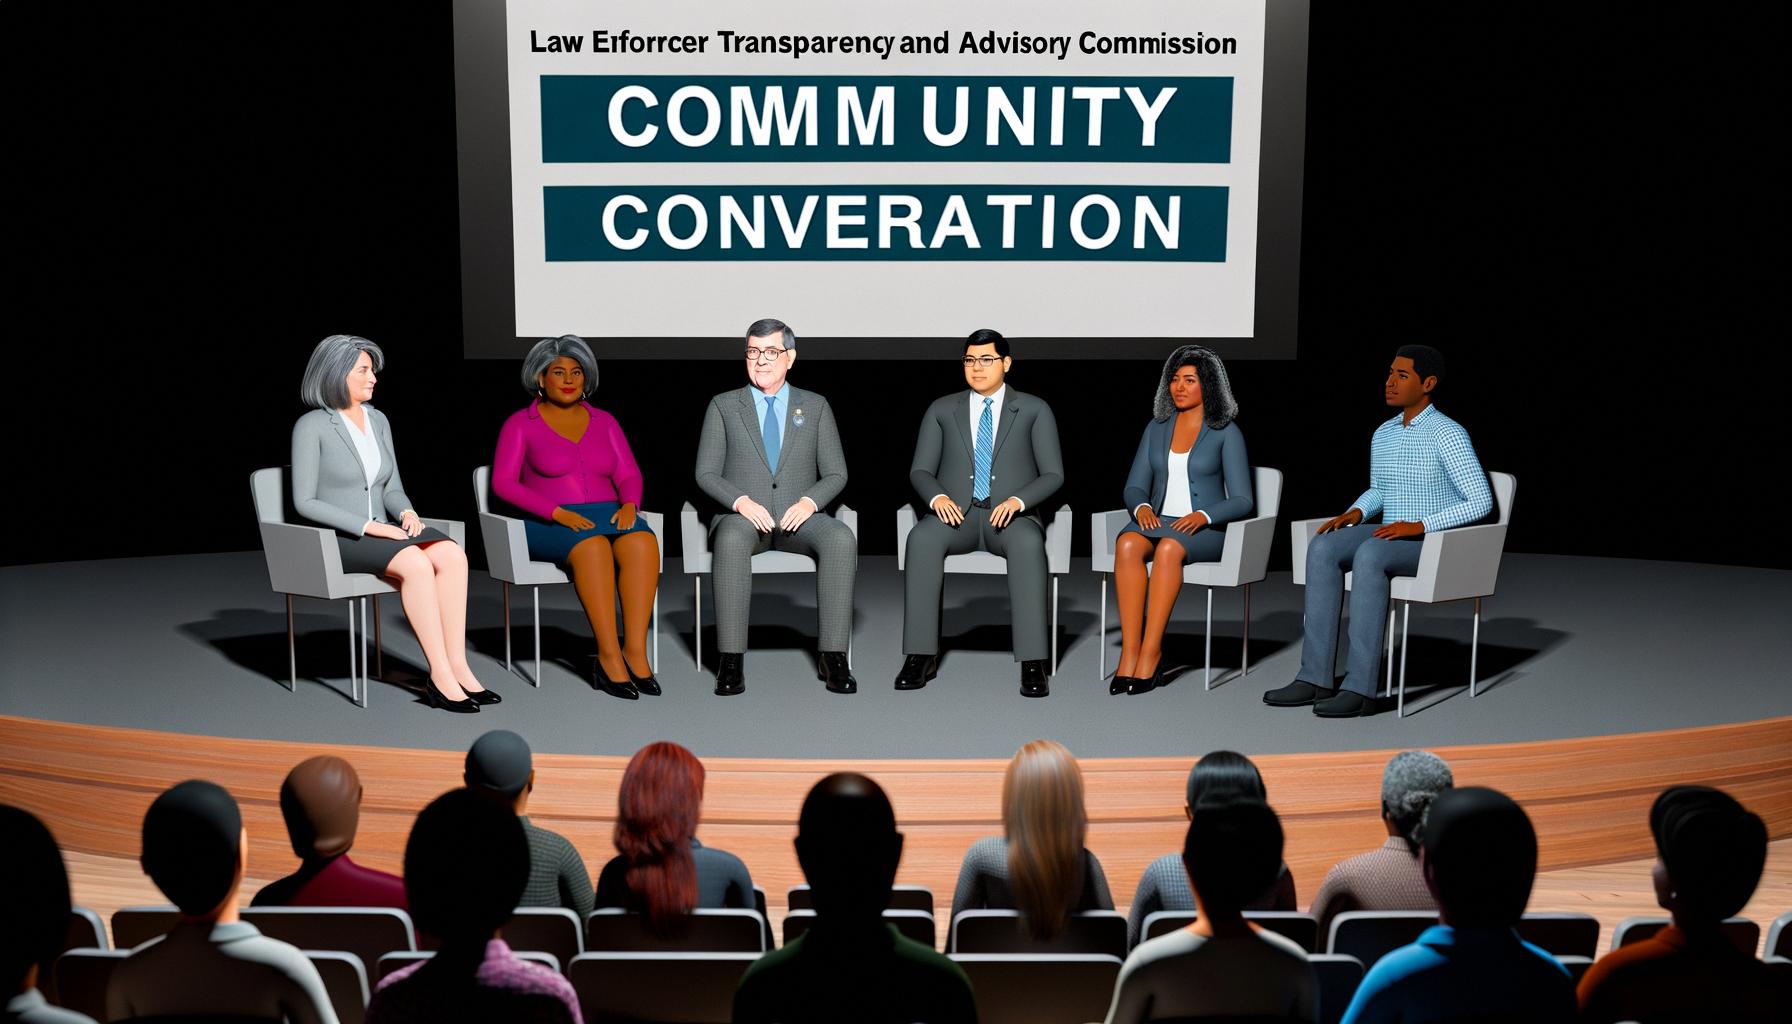 Law Enforcement Transparency and Advisory Commission hosts community conversation Balanced News